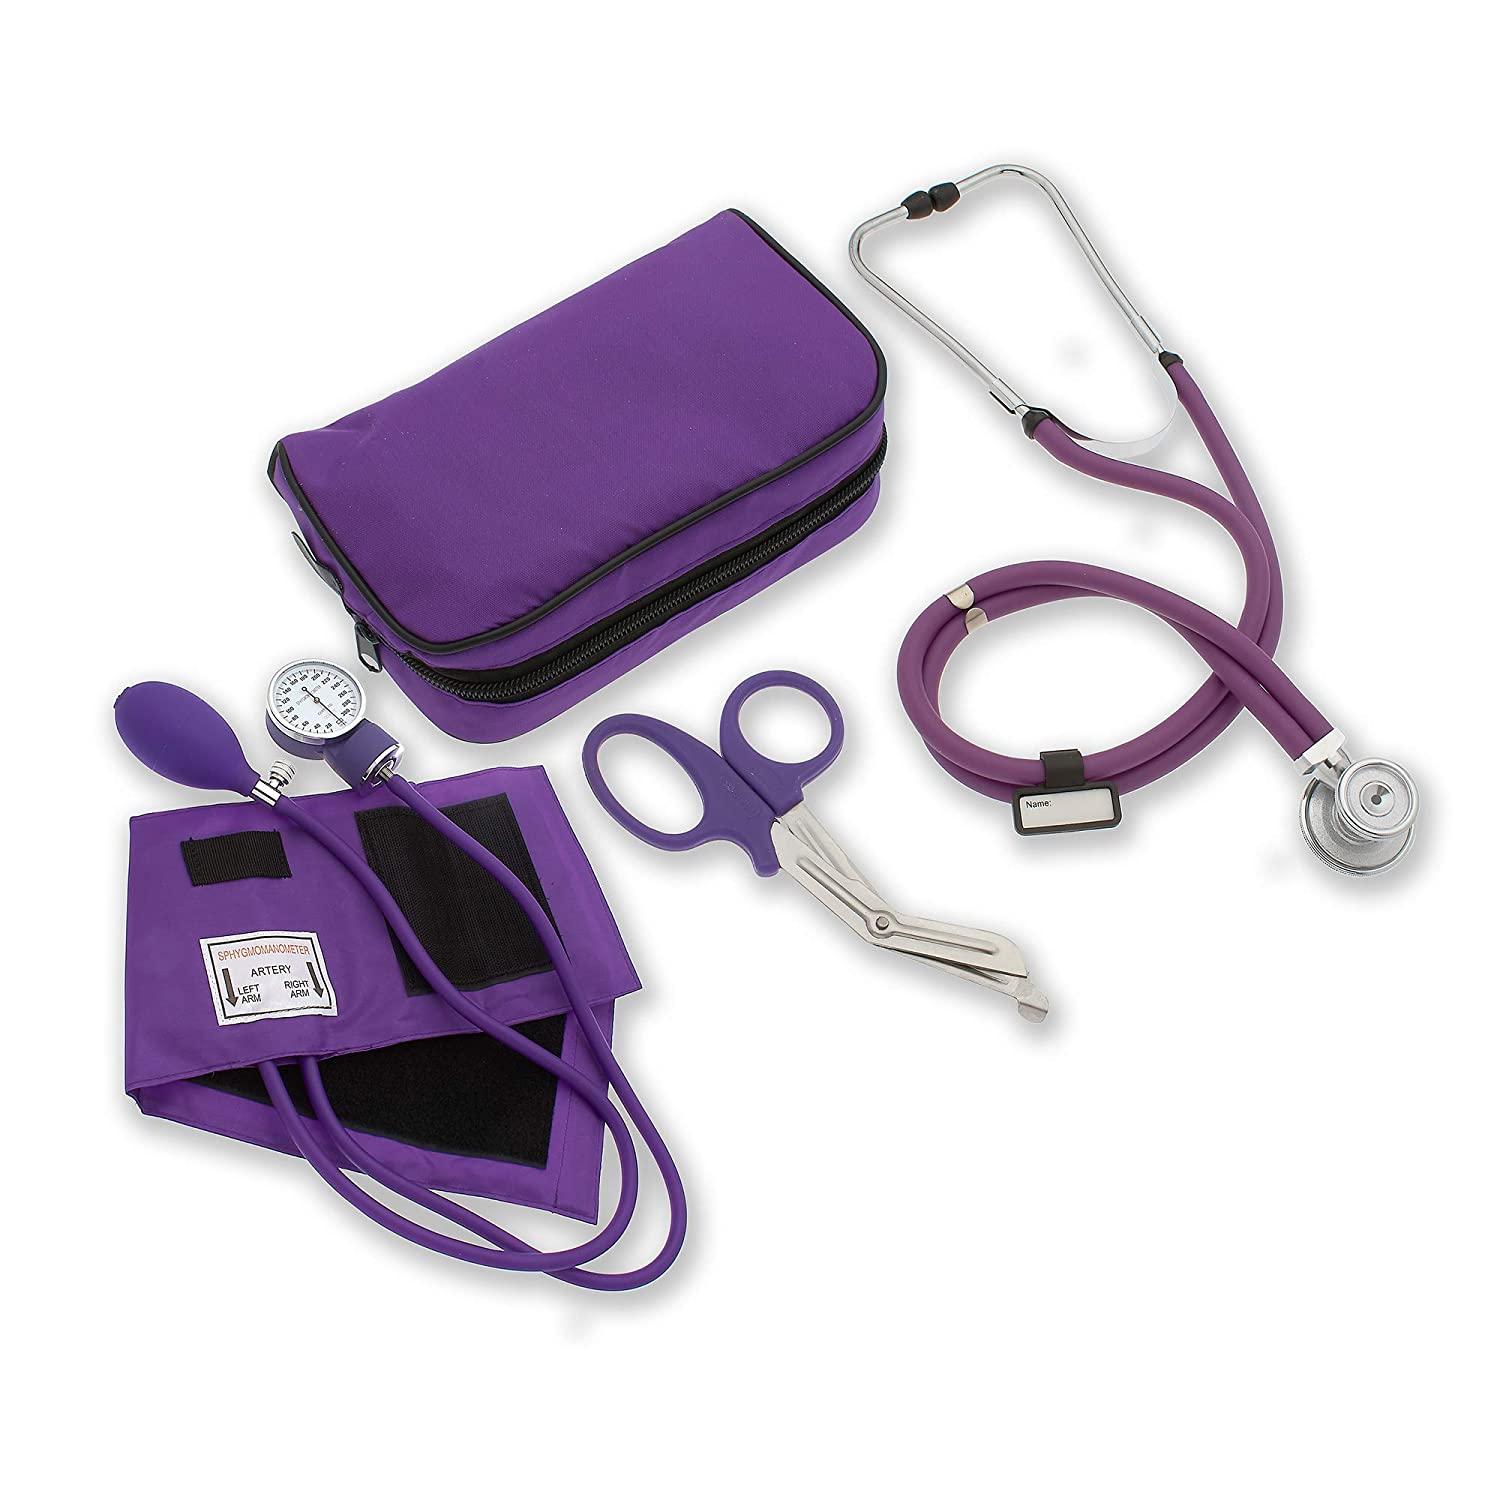 ASA TECHMED Nurse Essentials For Work Starter Kit, Stethoscope, Blood  Pressure Monitor, Otoscope, Tuning Forks And More 18 Pcs Doctor Kit, Nurse  Gift